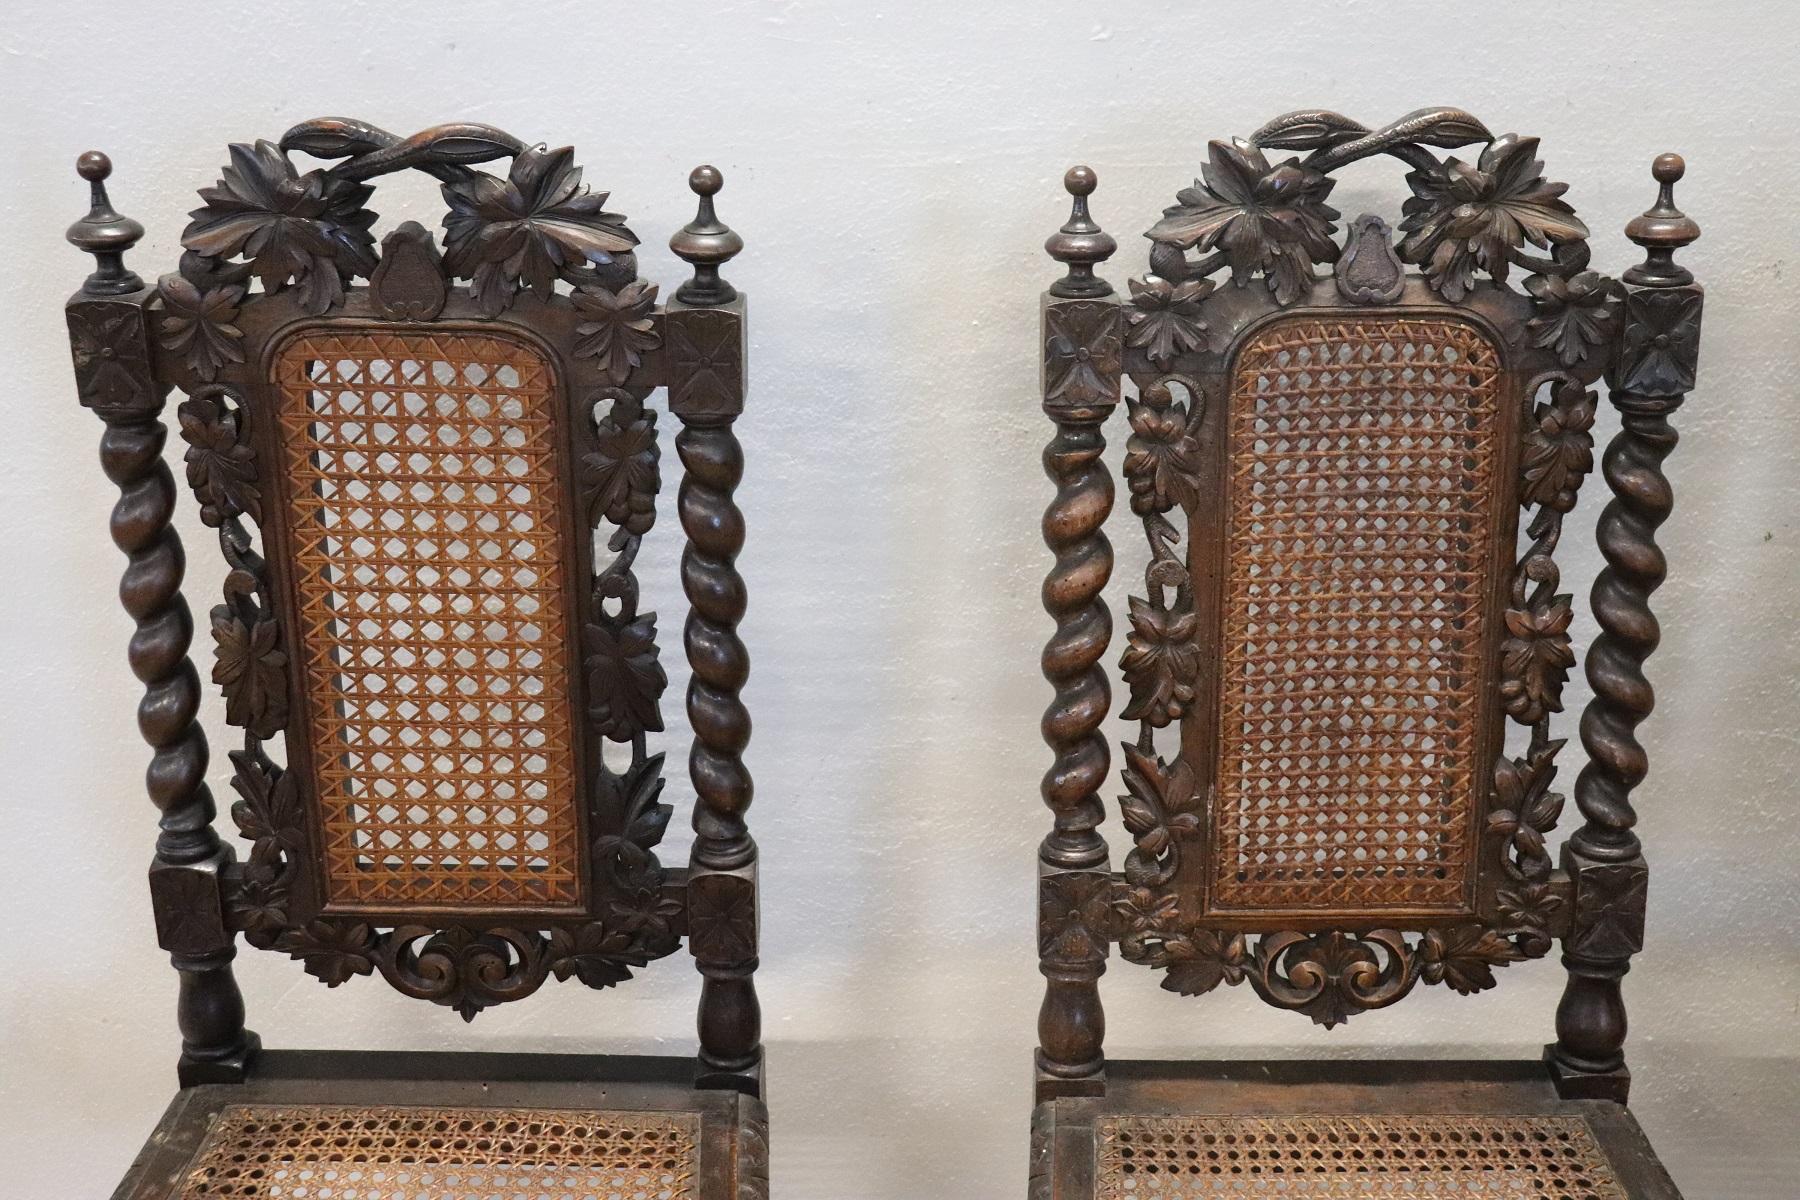 Very rare series of four dining room chairs production of Italy cabinetmakers in renaissance style, 1880. Beautiful line with turned legs. The backrest of these chairs is high with a richly carved walnut decoration. Of great value is the original